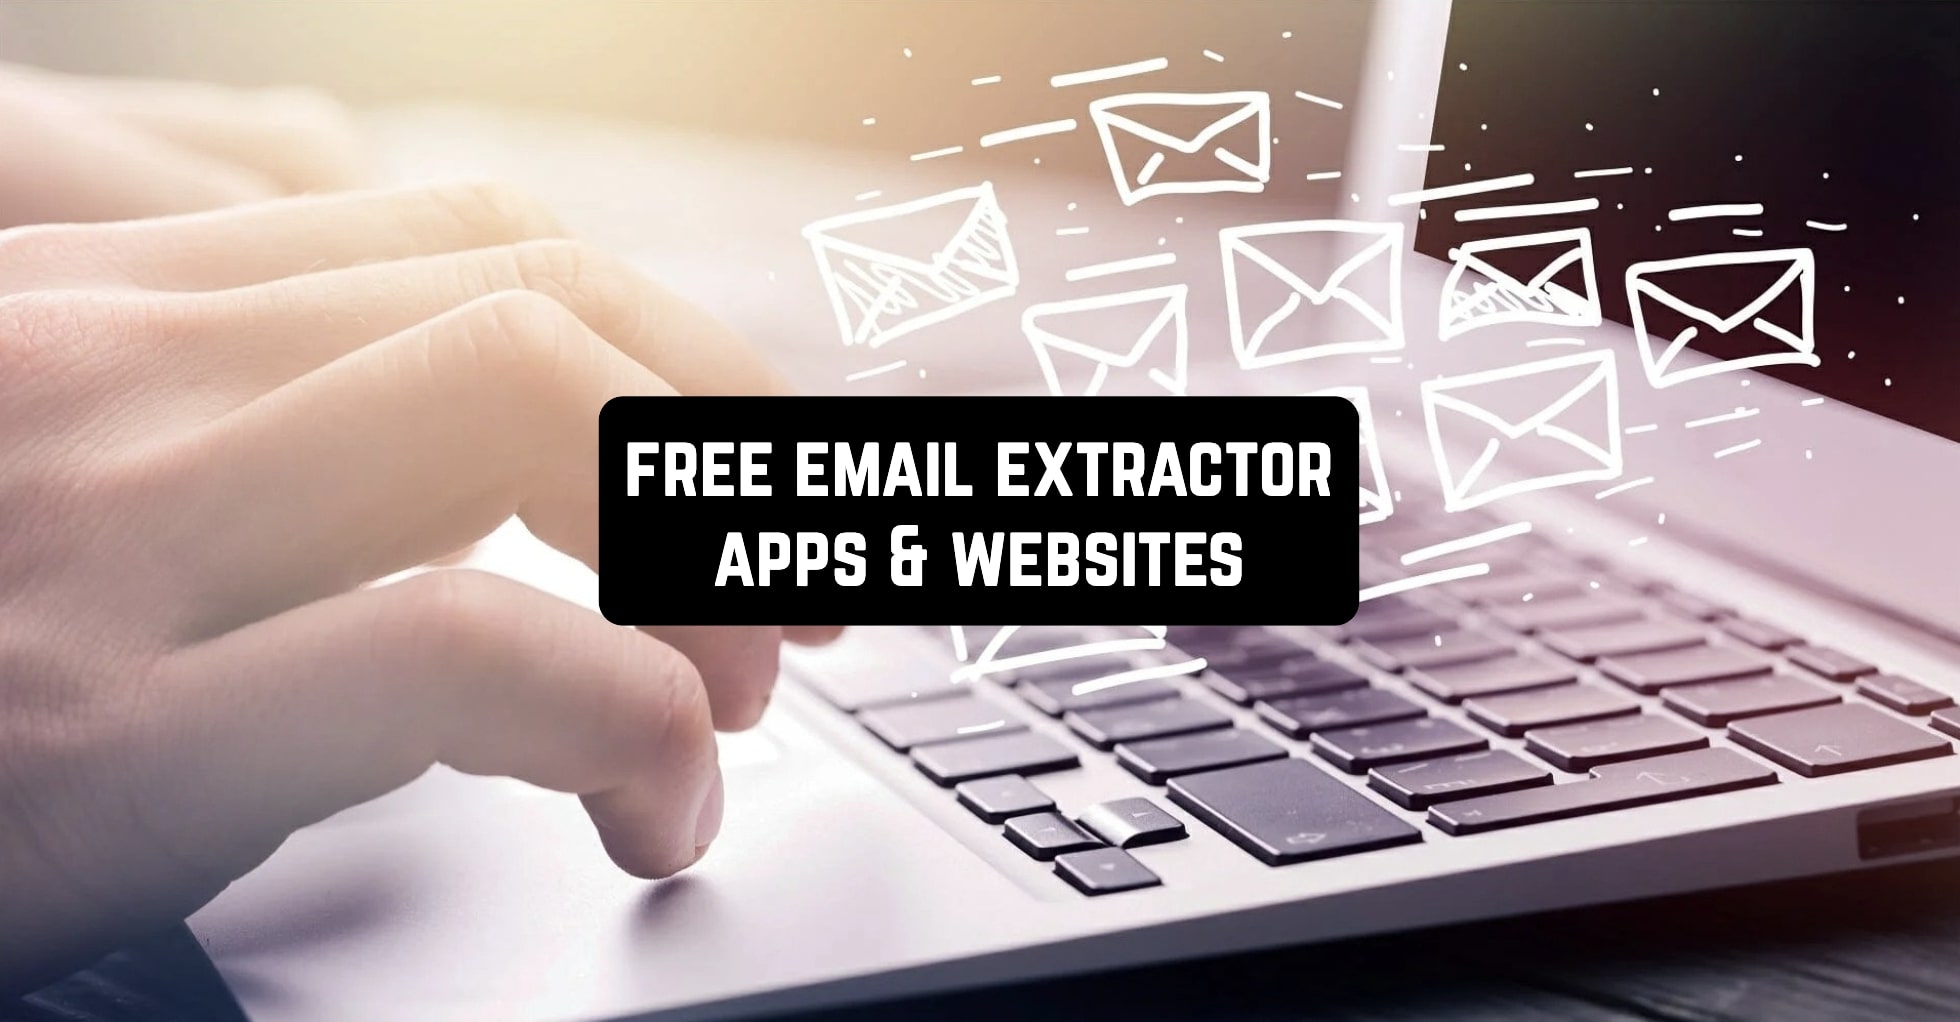 Free-Email-Extractor-Apps-Websites